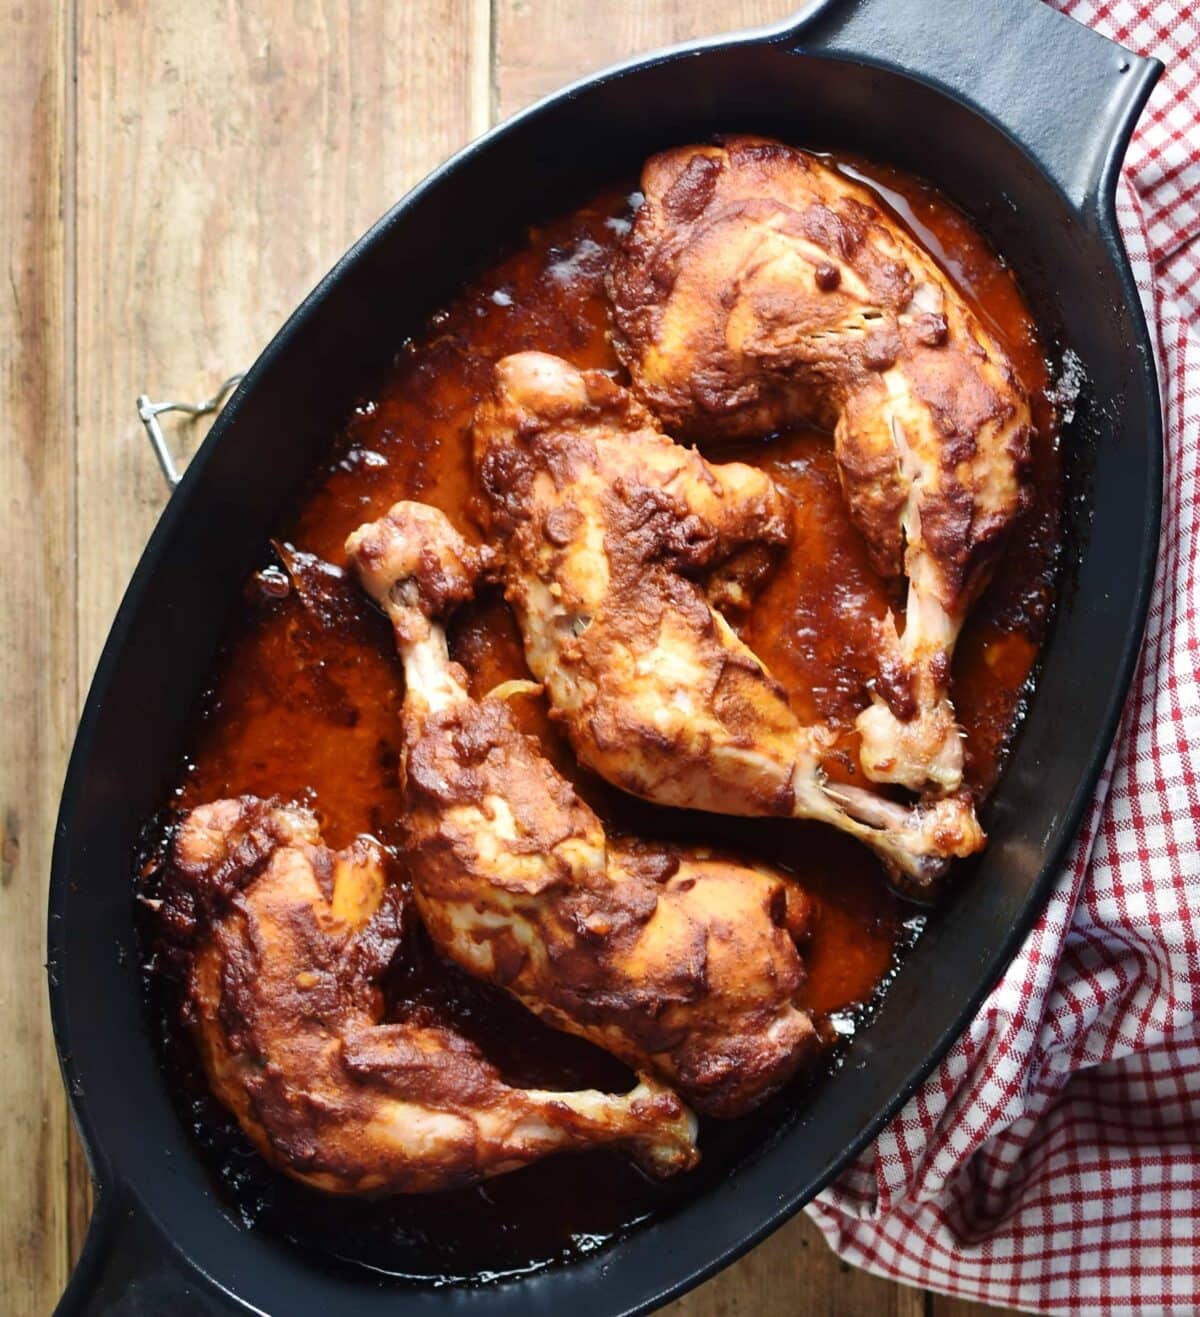 Cooked chicken legs in marinade inside oval black dish with red-and-white checkered cloth.